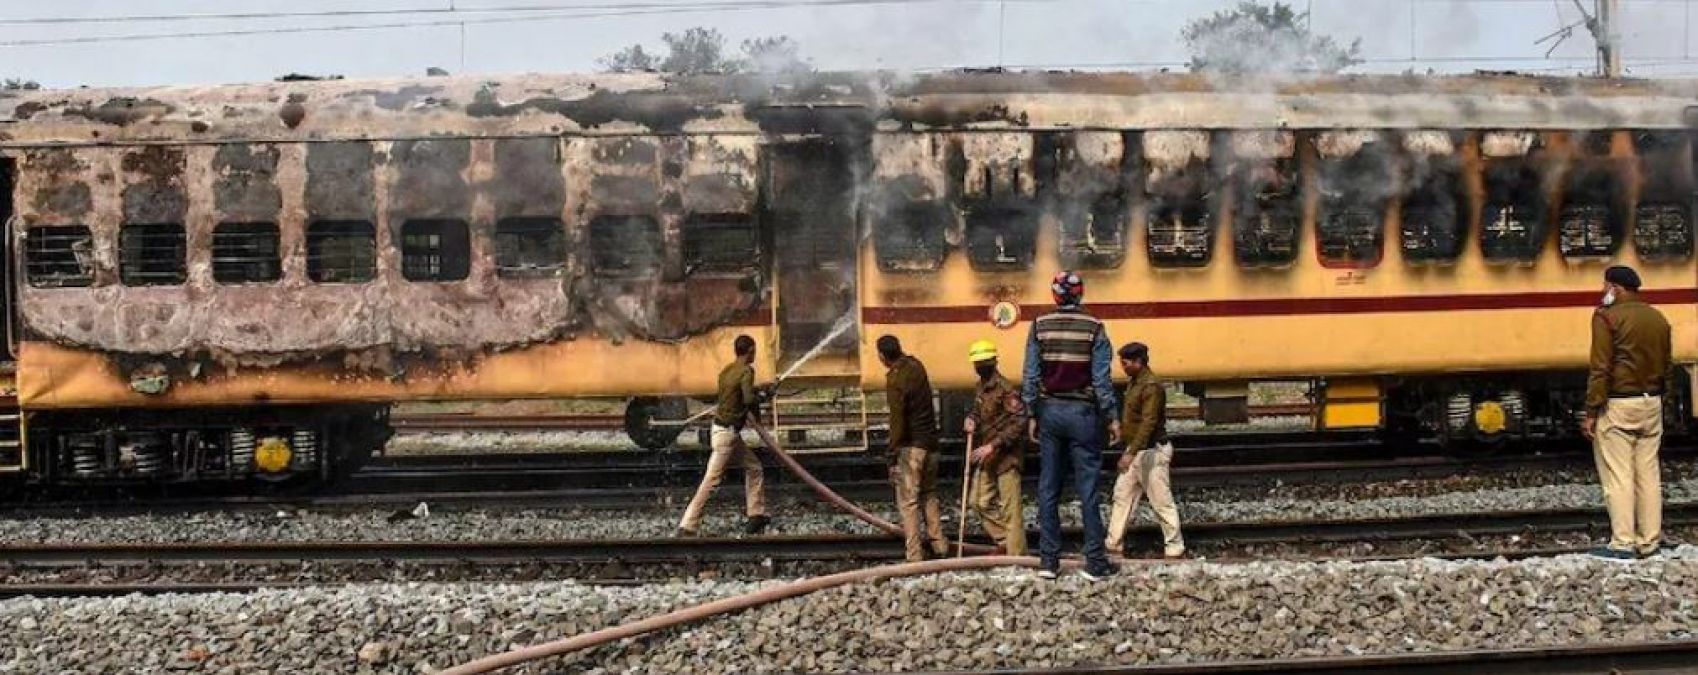 Students unhappy with result, Vandalism of railway property in UP-Bihar